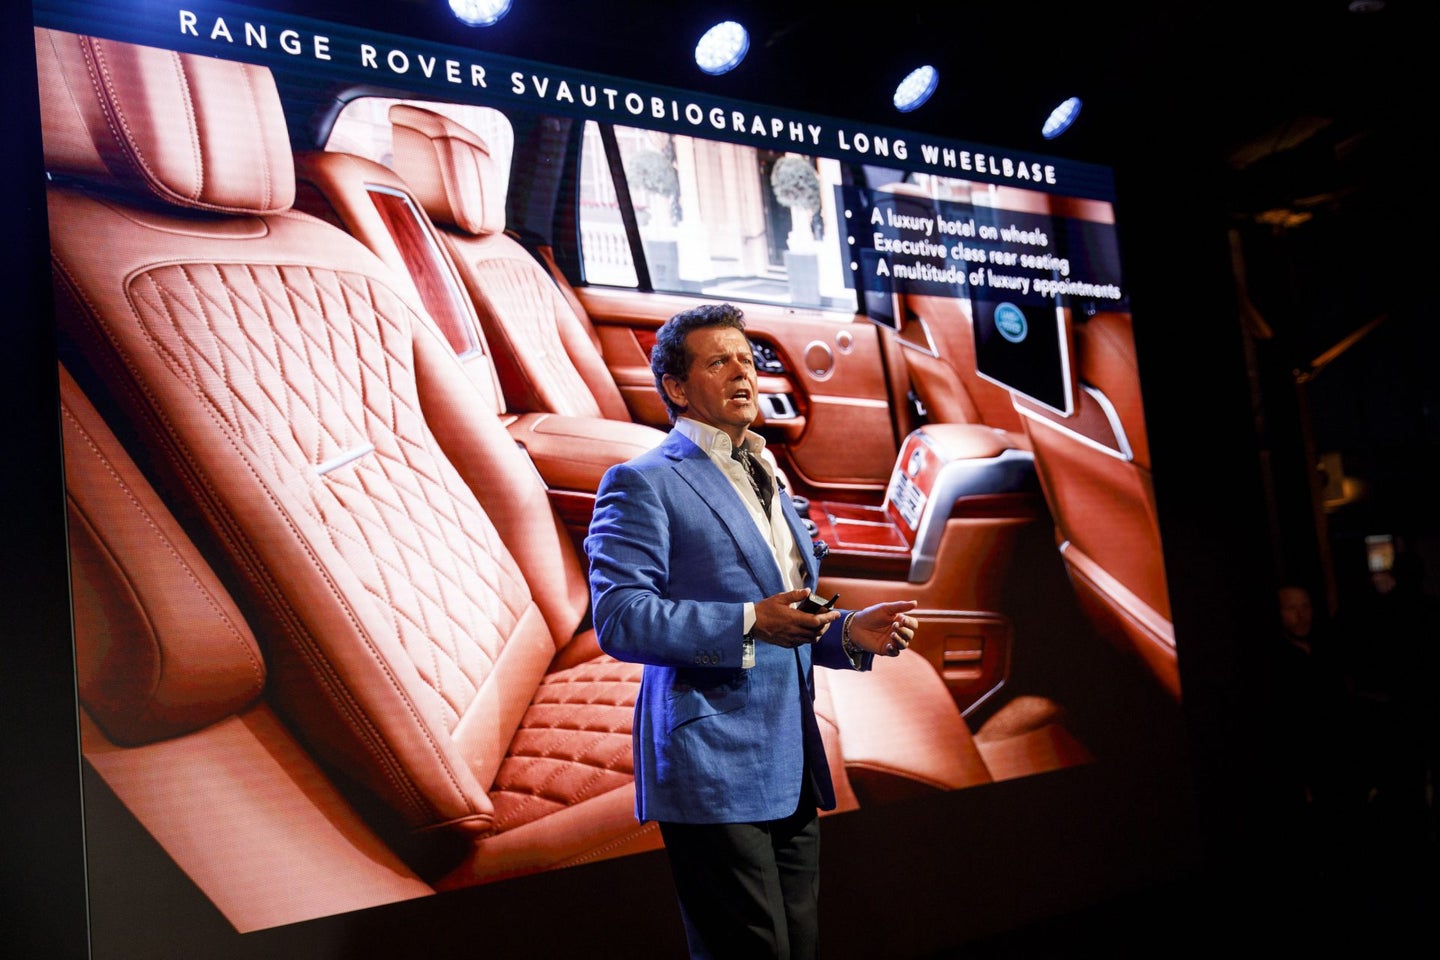 Land Rover’s Gerry McGovern: ‘Good Luck’ to Brands Trying to Overtop Range Rover Capability, Luxury